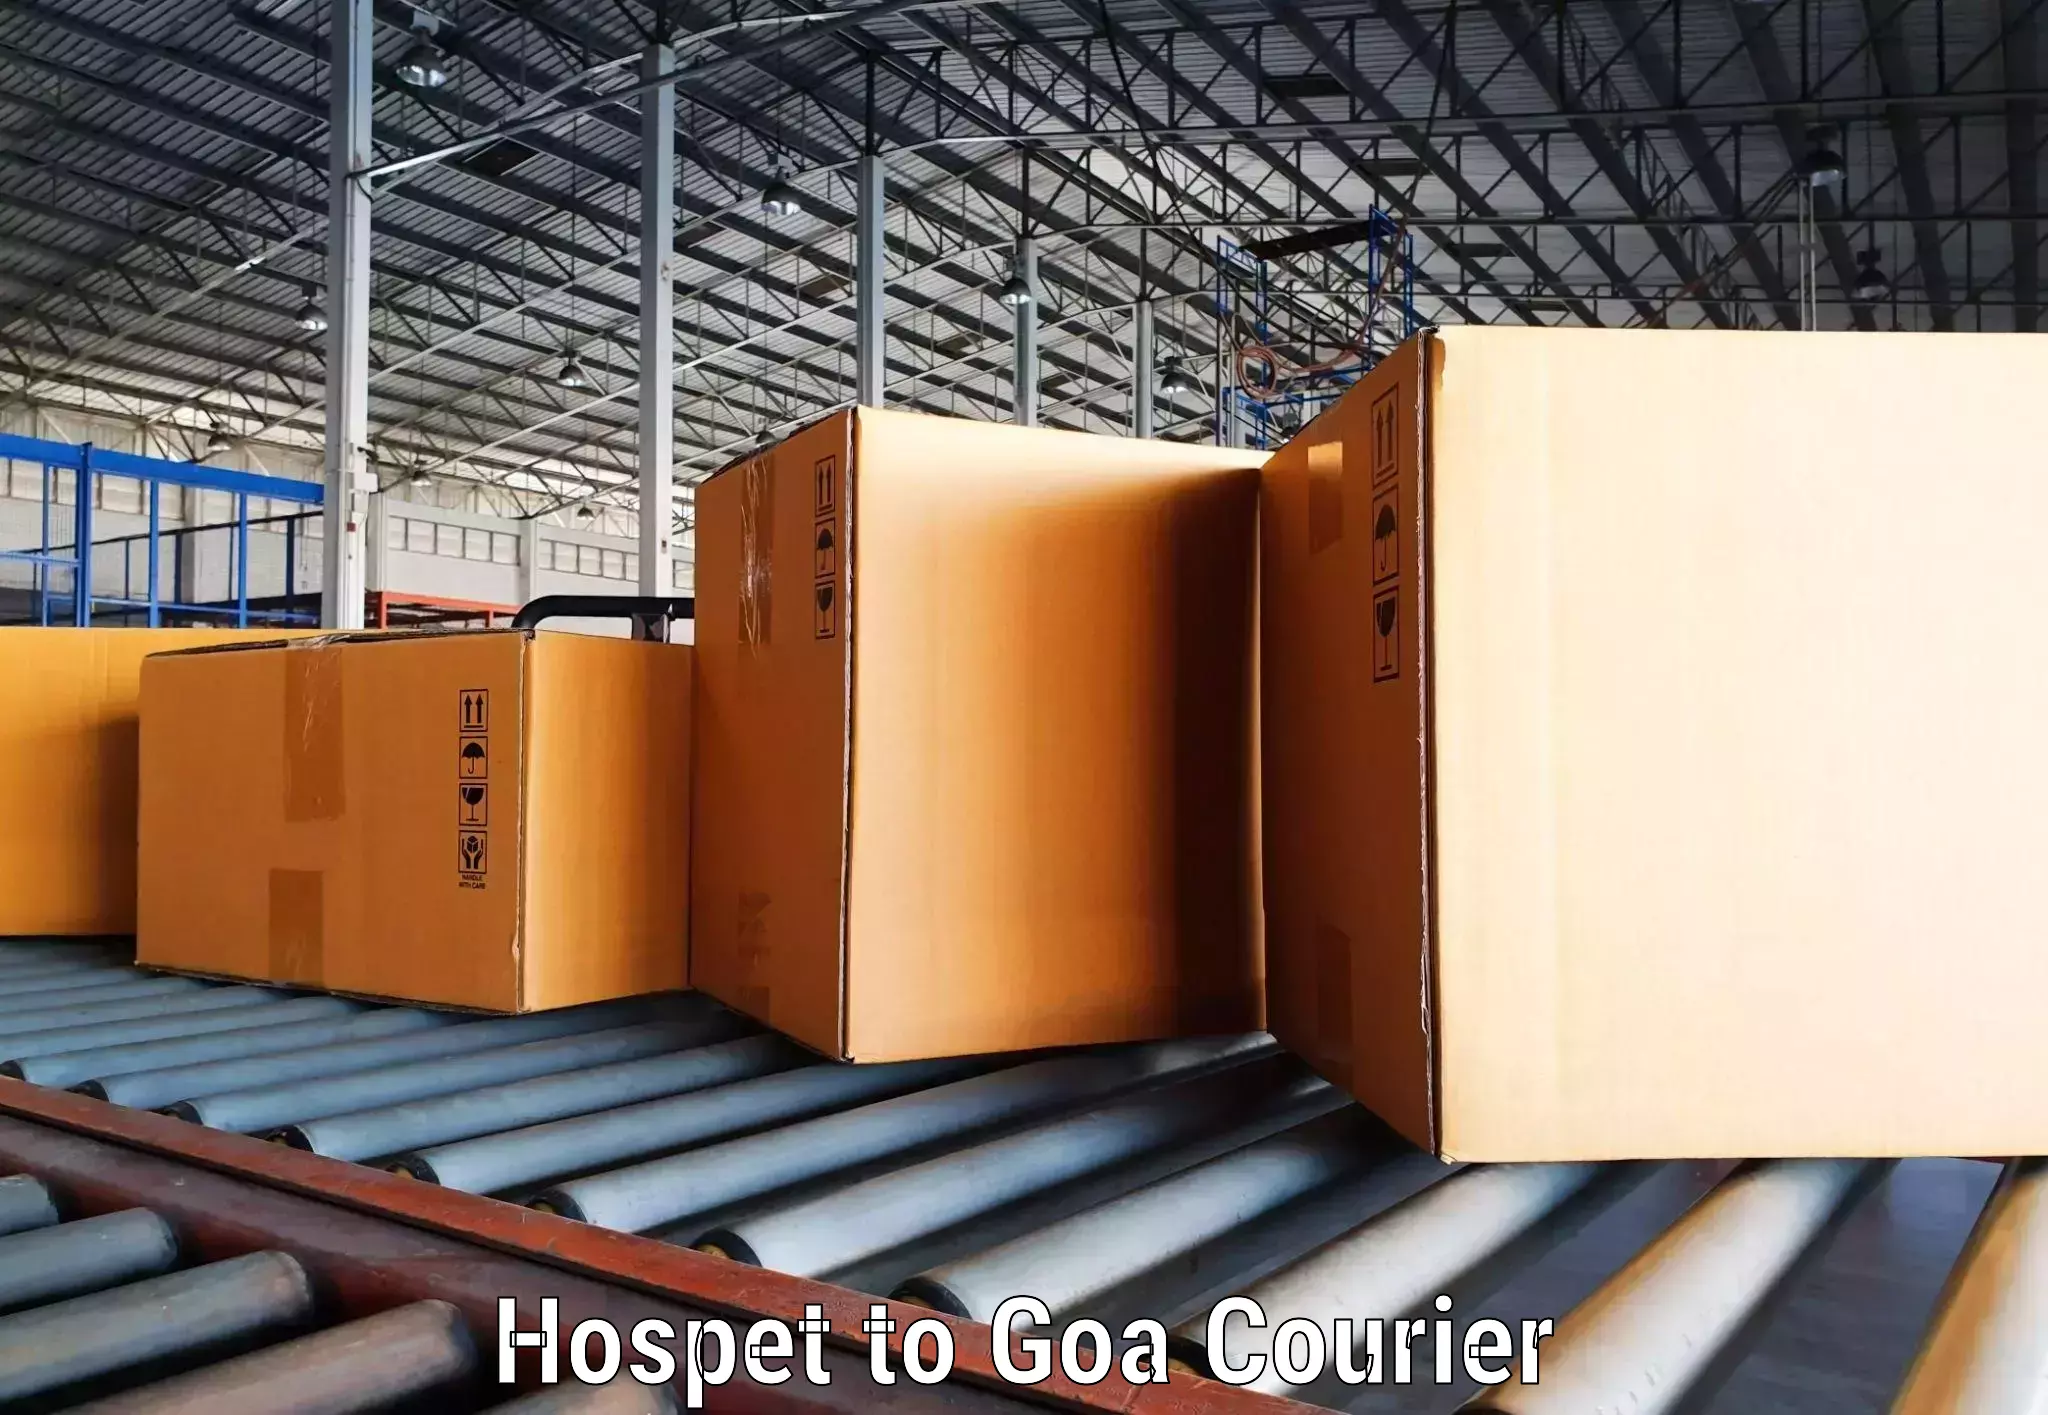 Express delivery capabilities Hospet to Goa